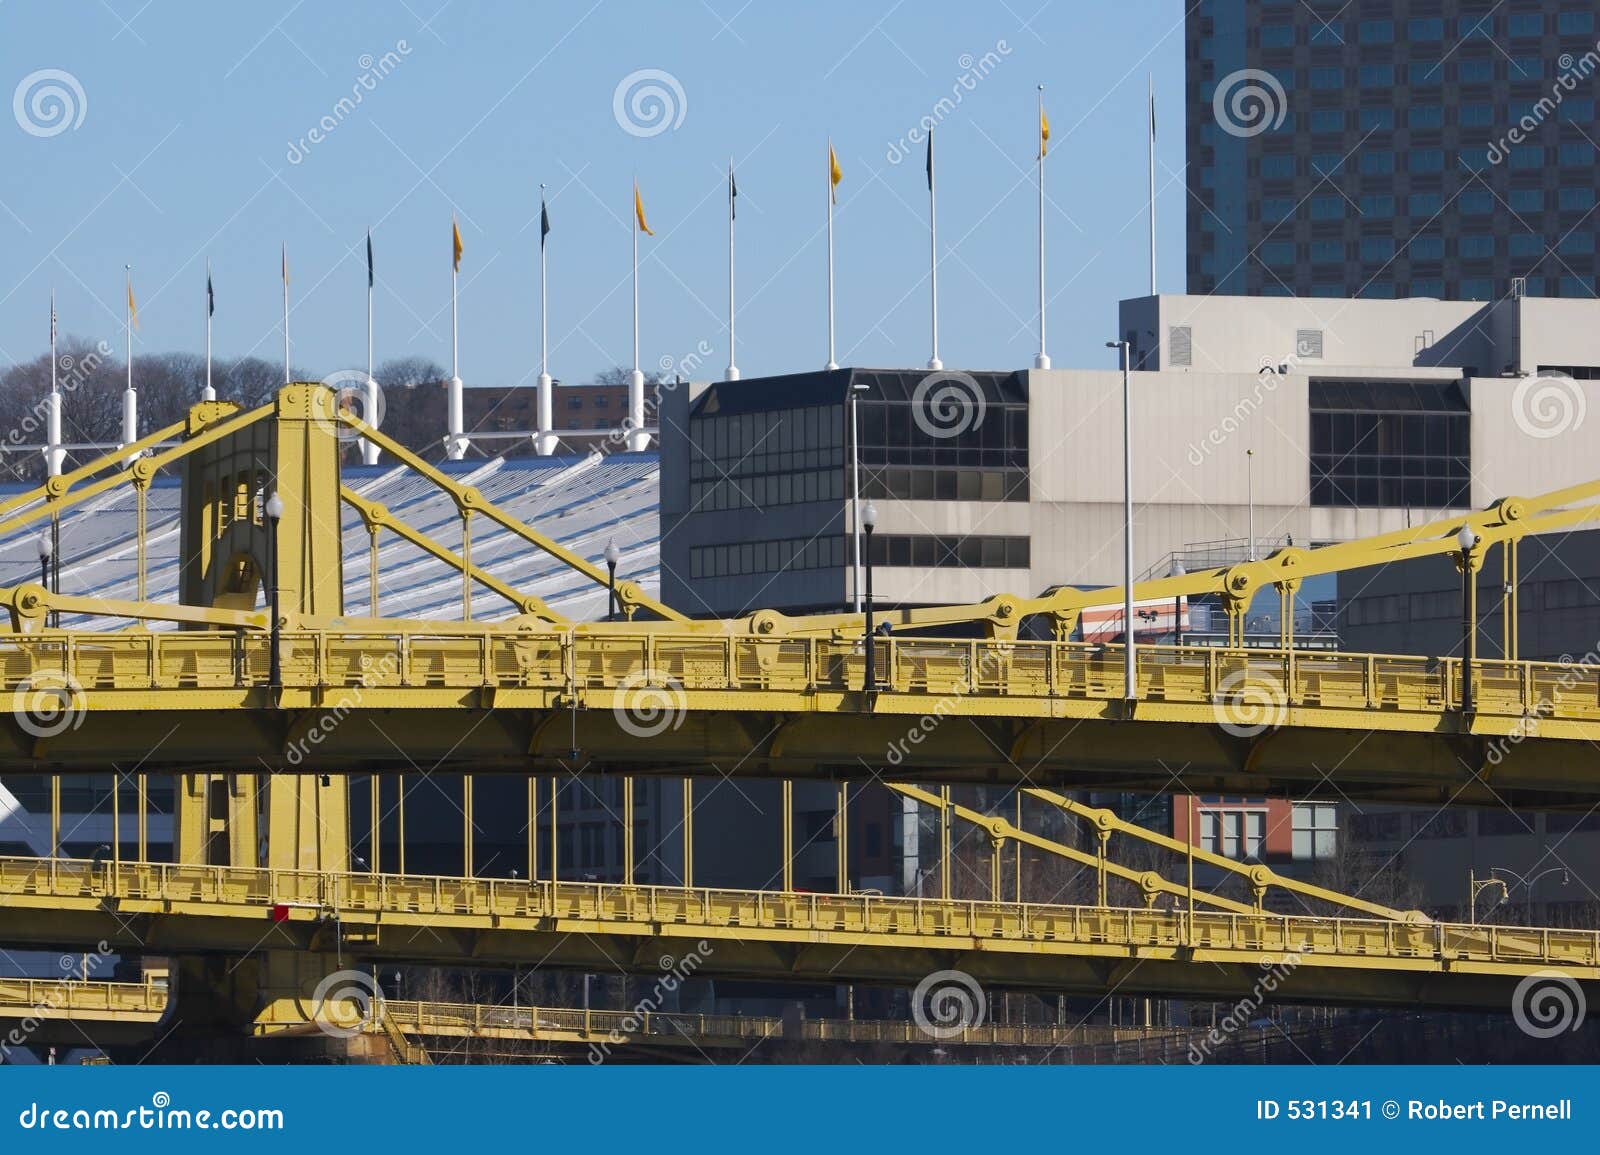 Pittsburgh Convention Center & Bridges Stock Image - Image of glass